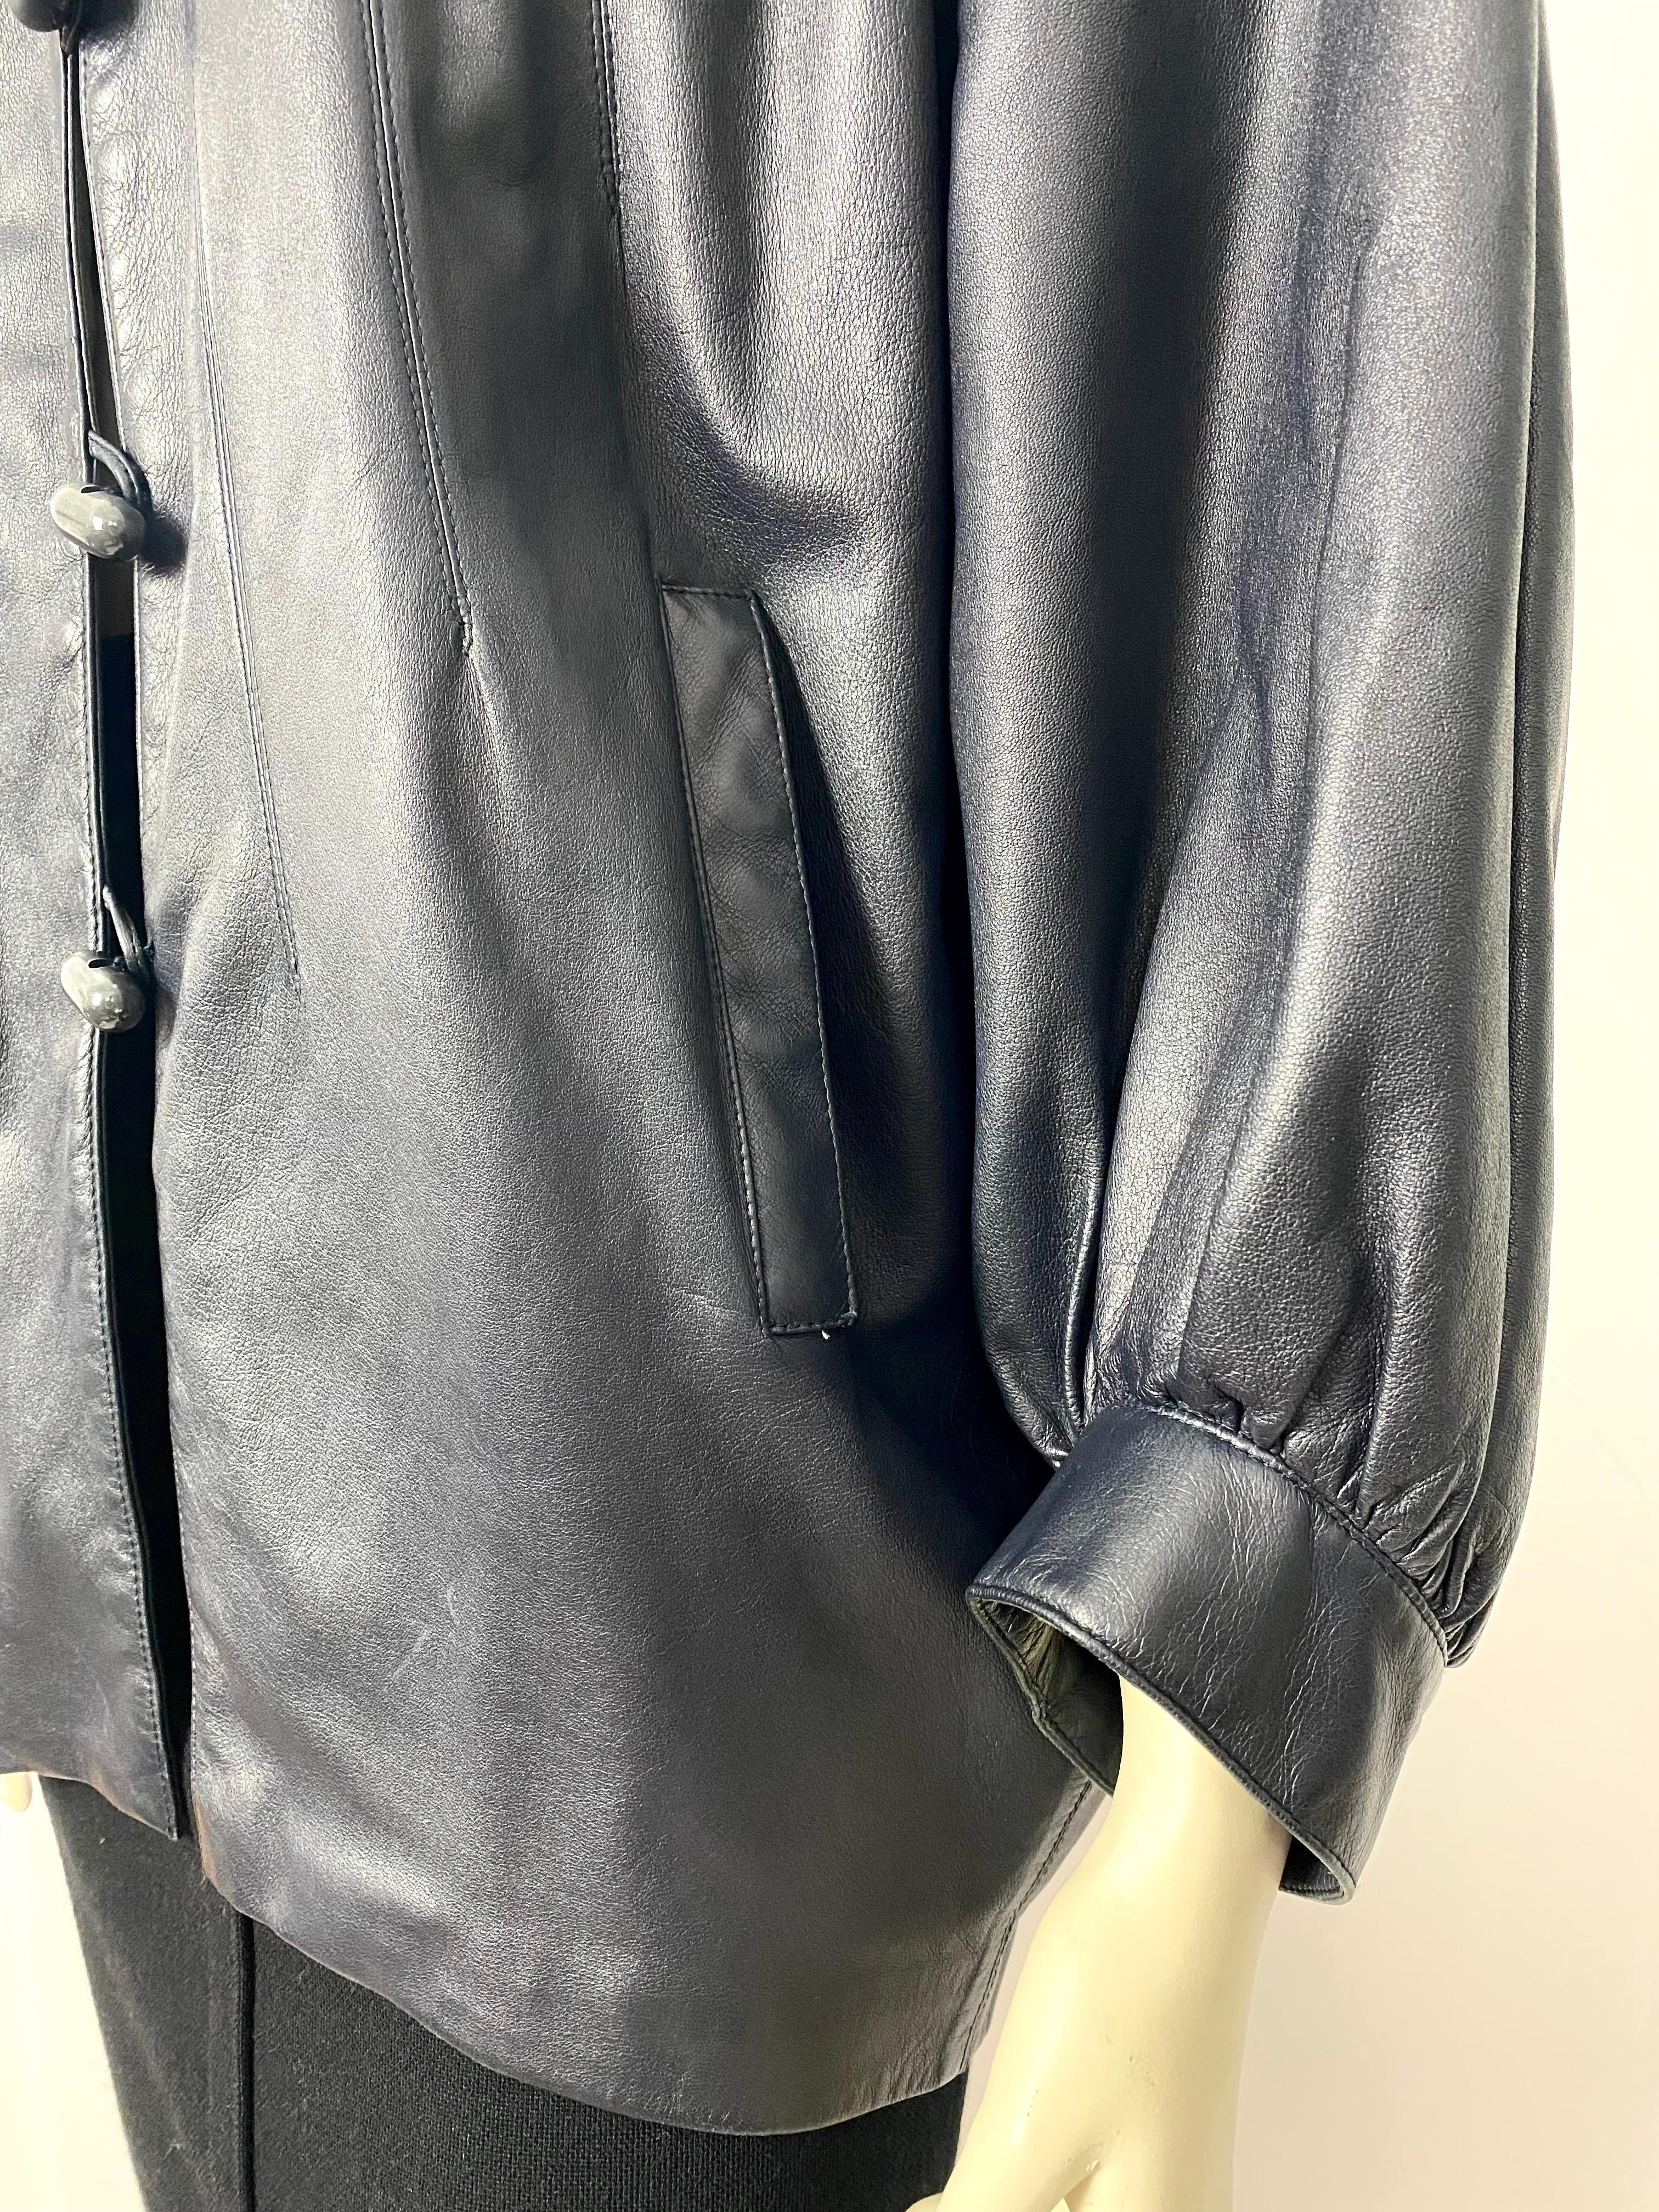 Women's or Men's Vintage lamb leather jacket by Yves saint laurent rive gauche  from the 1980s